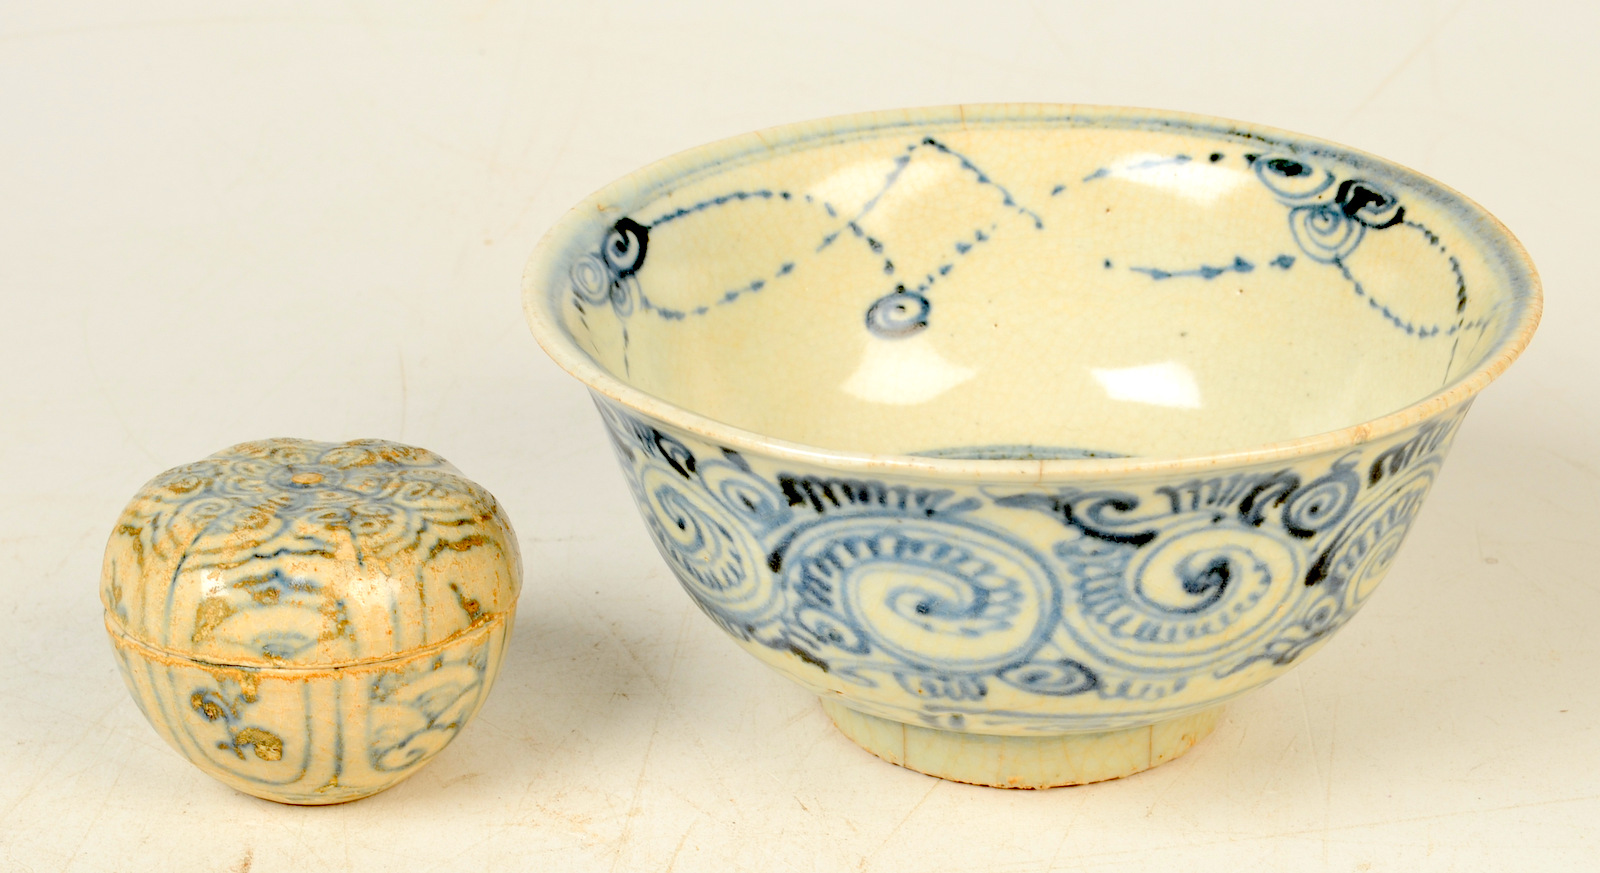 A Chinese 15th/16th century porcelain blue and white decorated south eastern trade bowl,